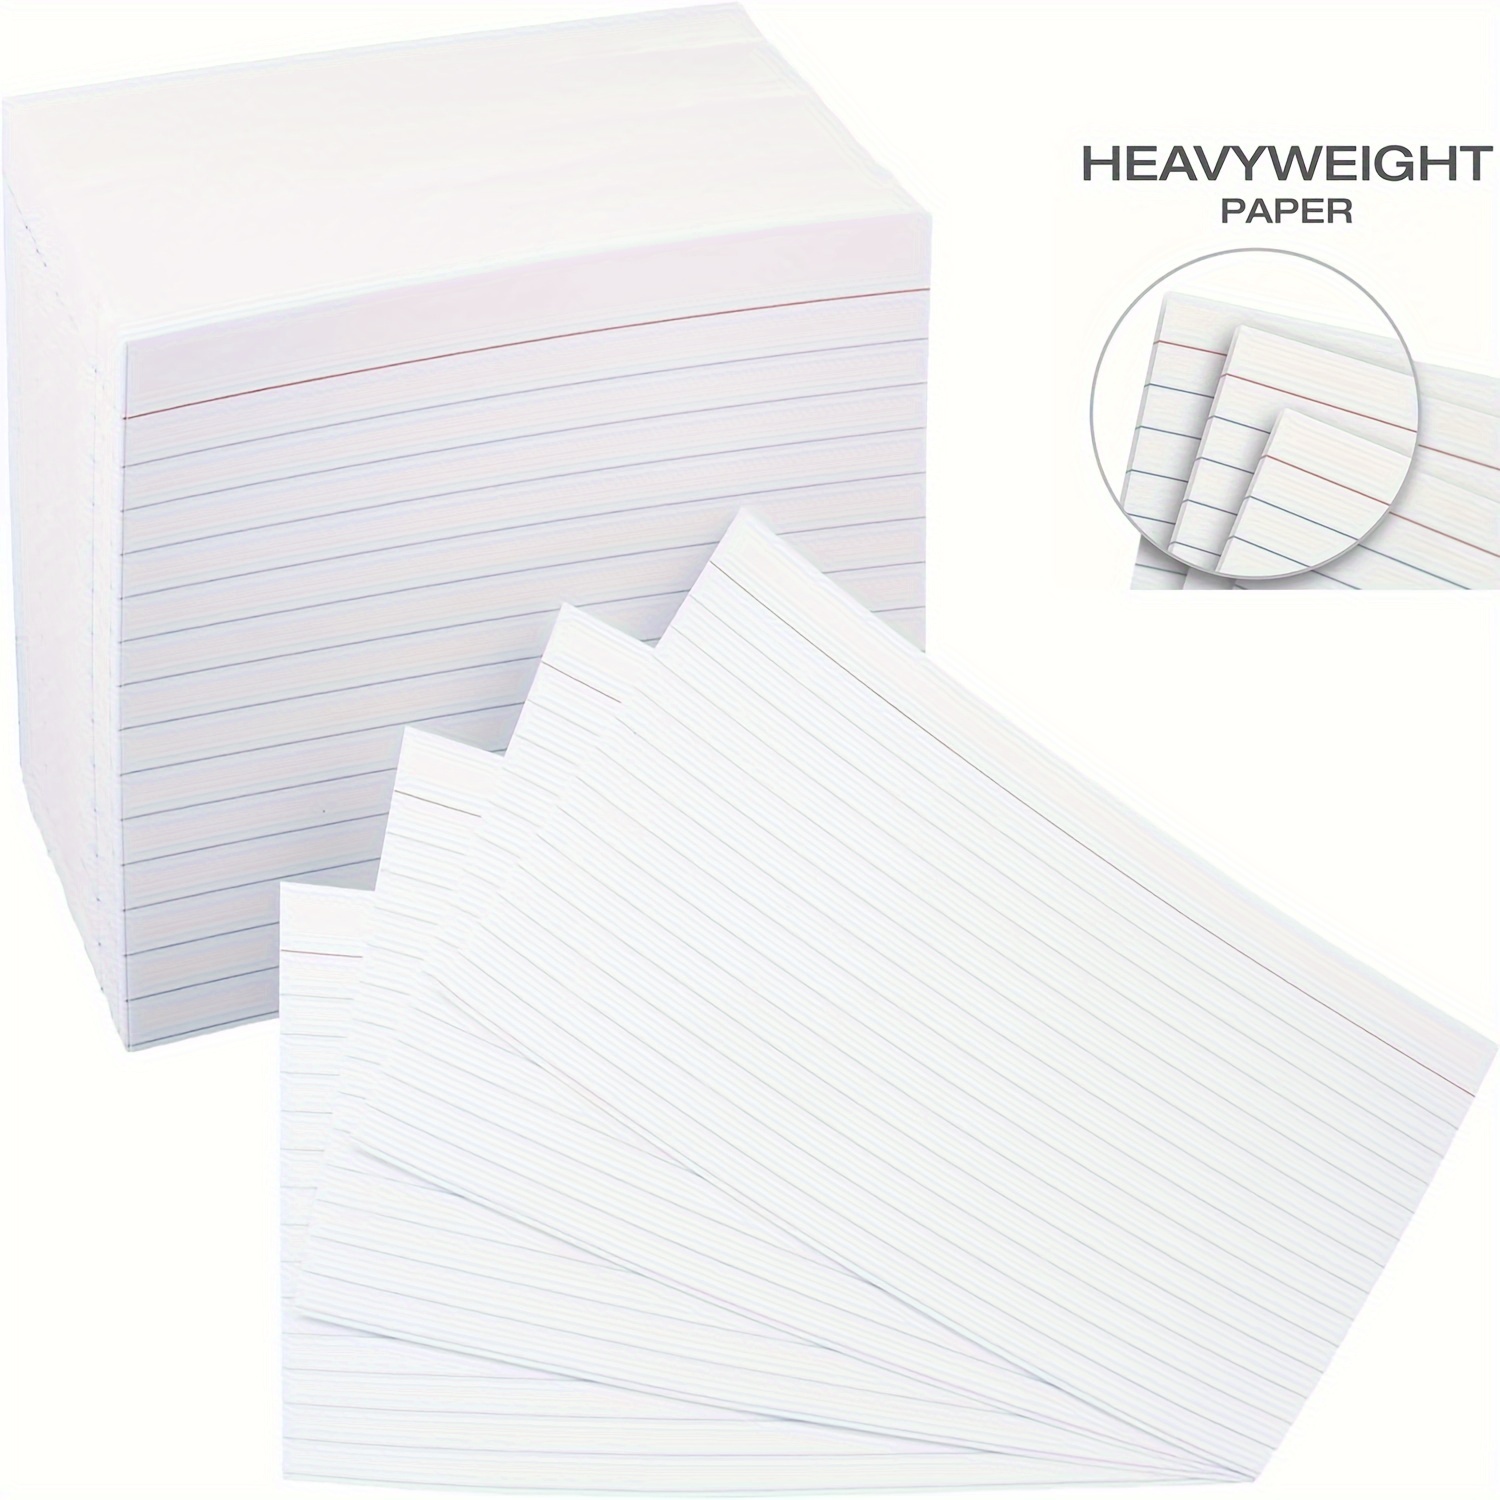 3X5 4X6 Inch American Index Card Index Cards Word Card Learning